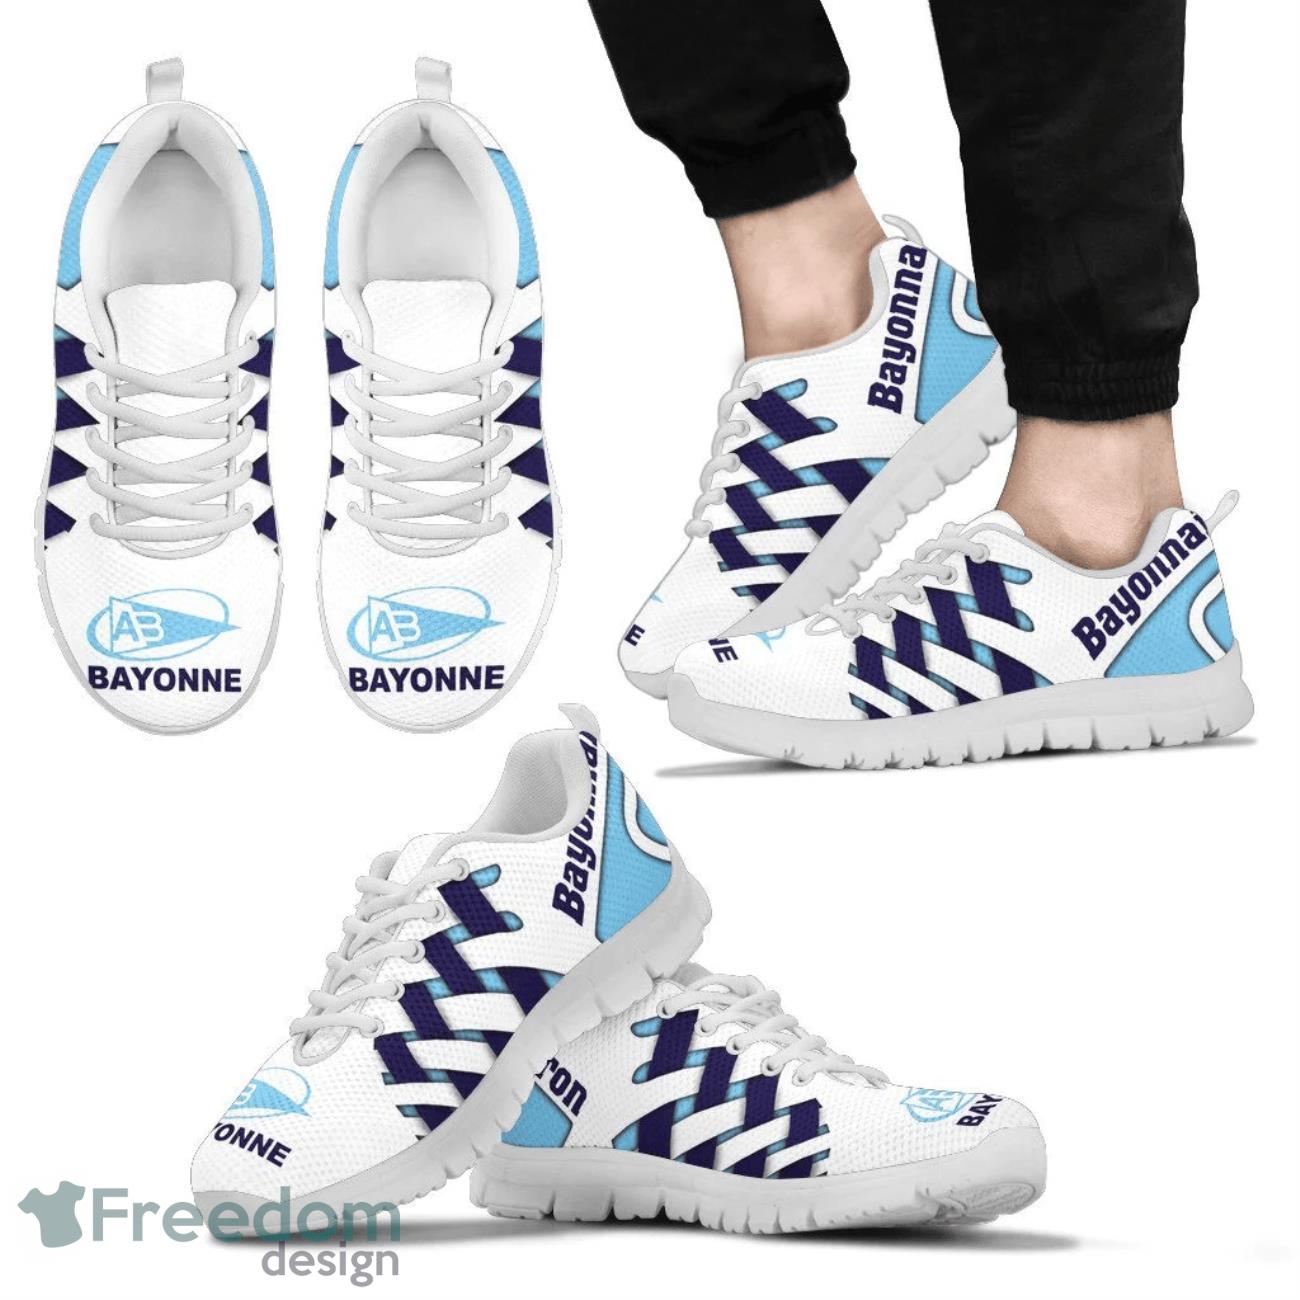 Aviron Bayonnais Logo Team Sneaker Shoes Gift For Fans Product Photo 2